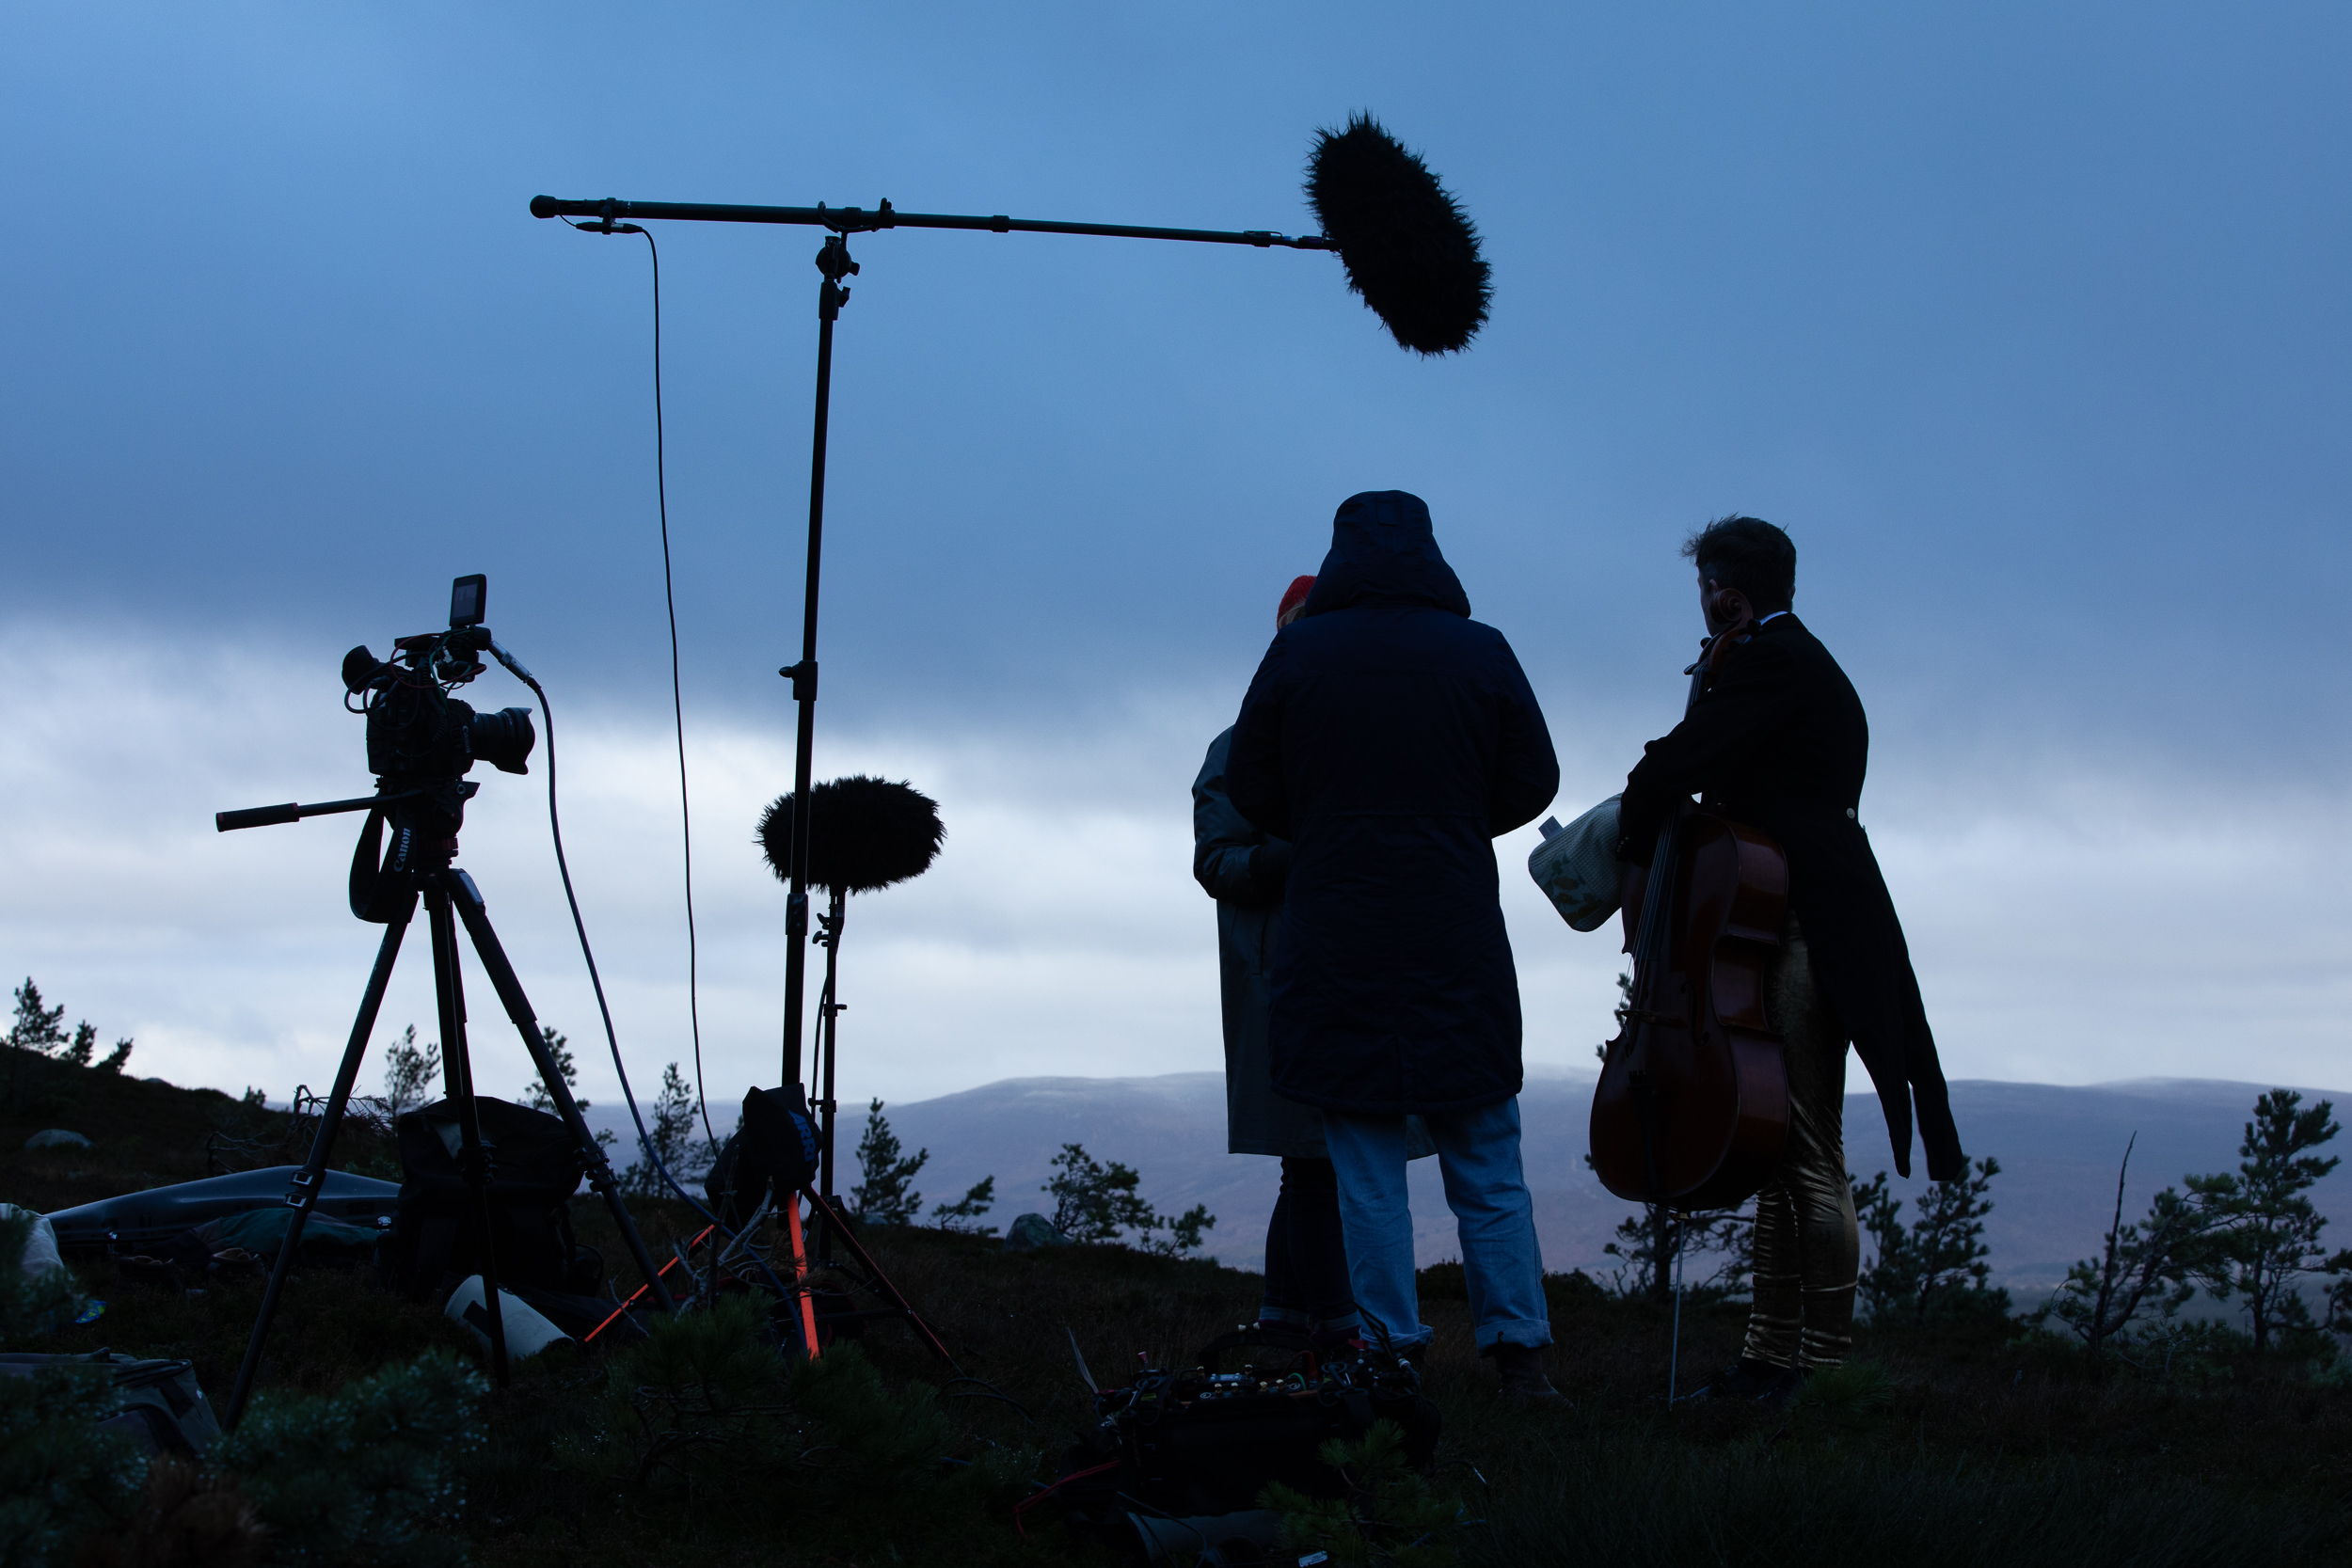 Early morning film set in sihoutte against clouds